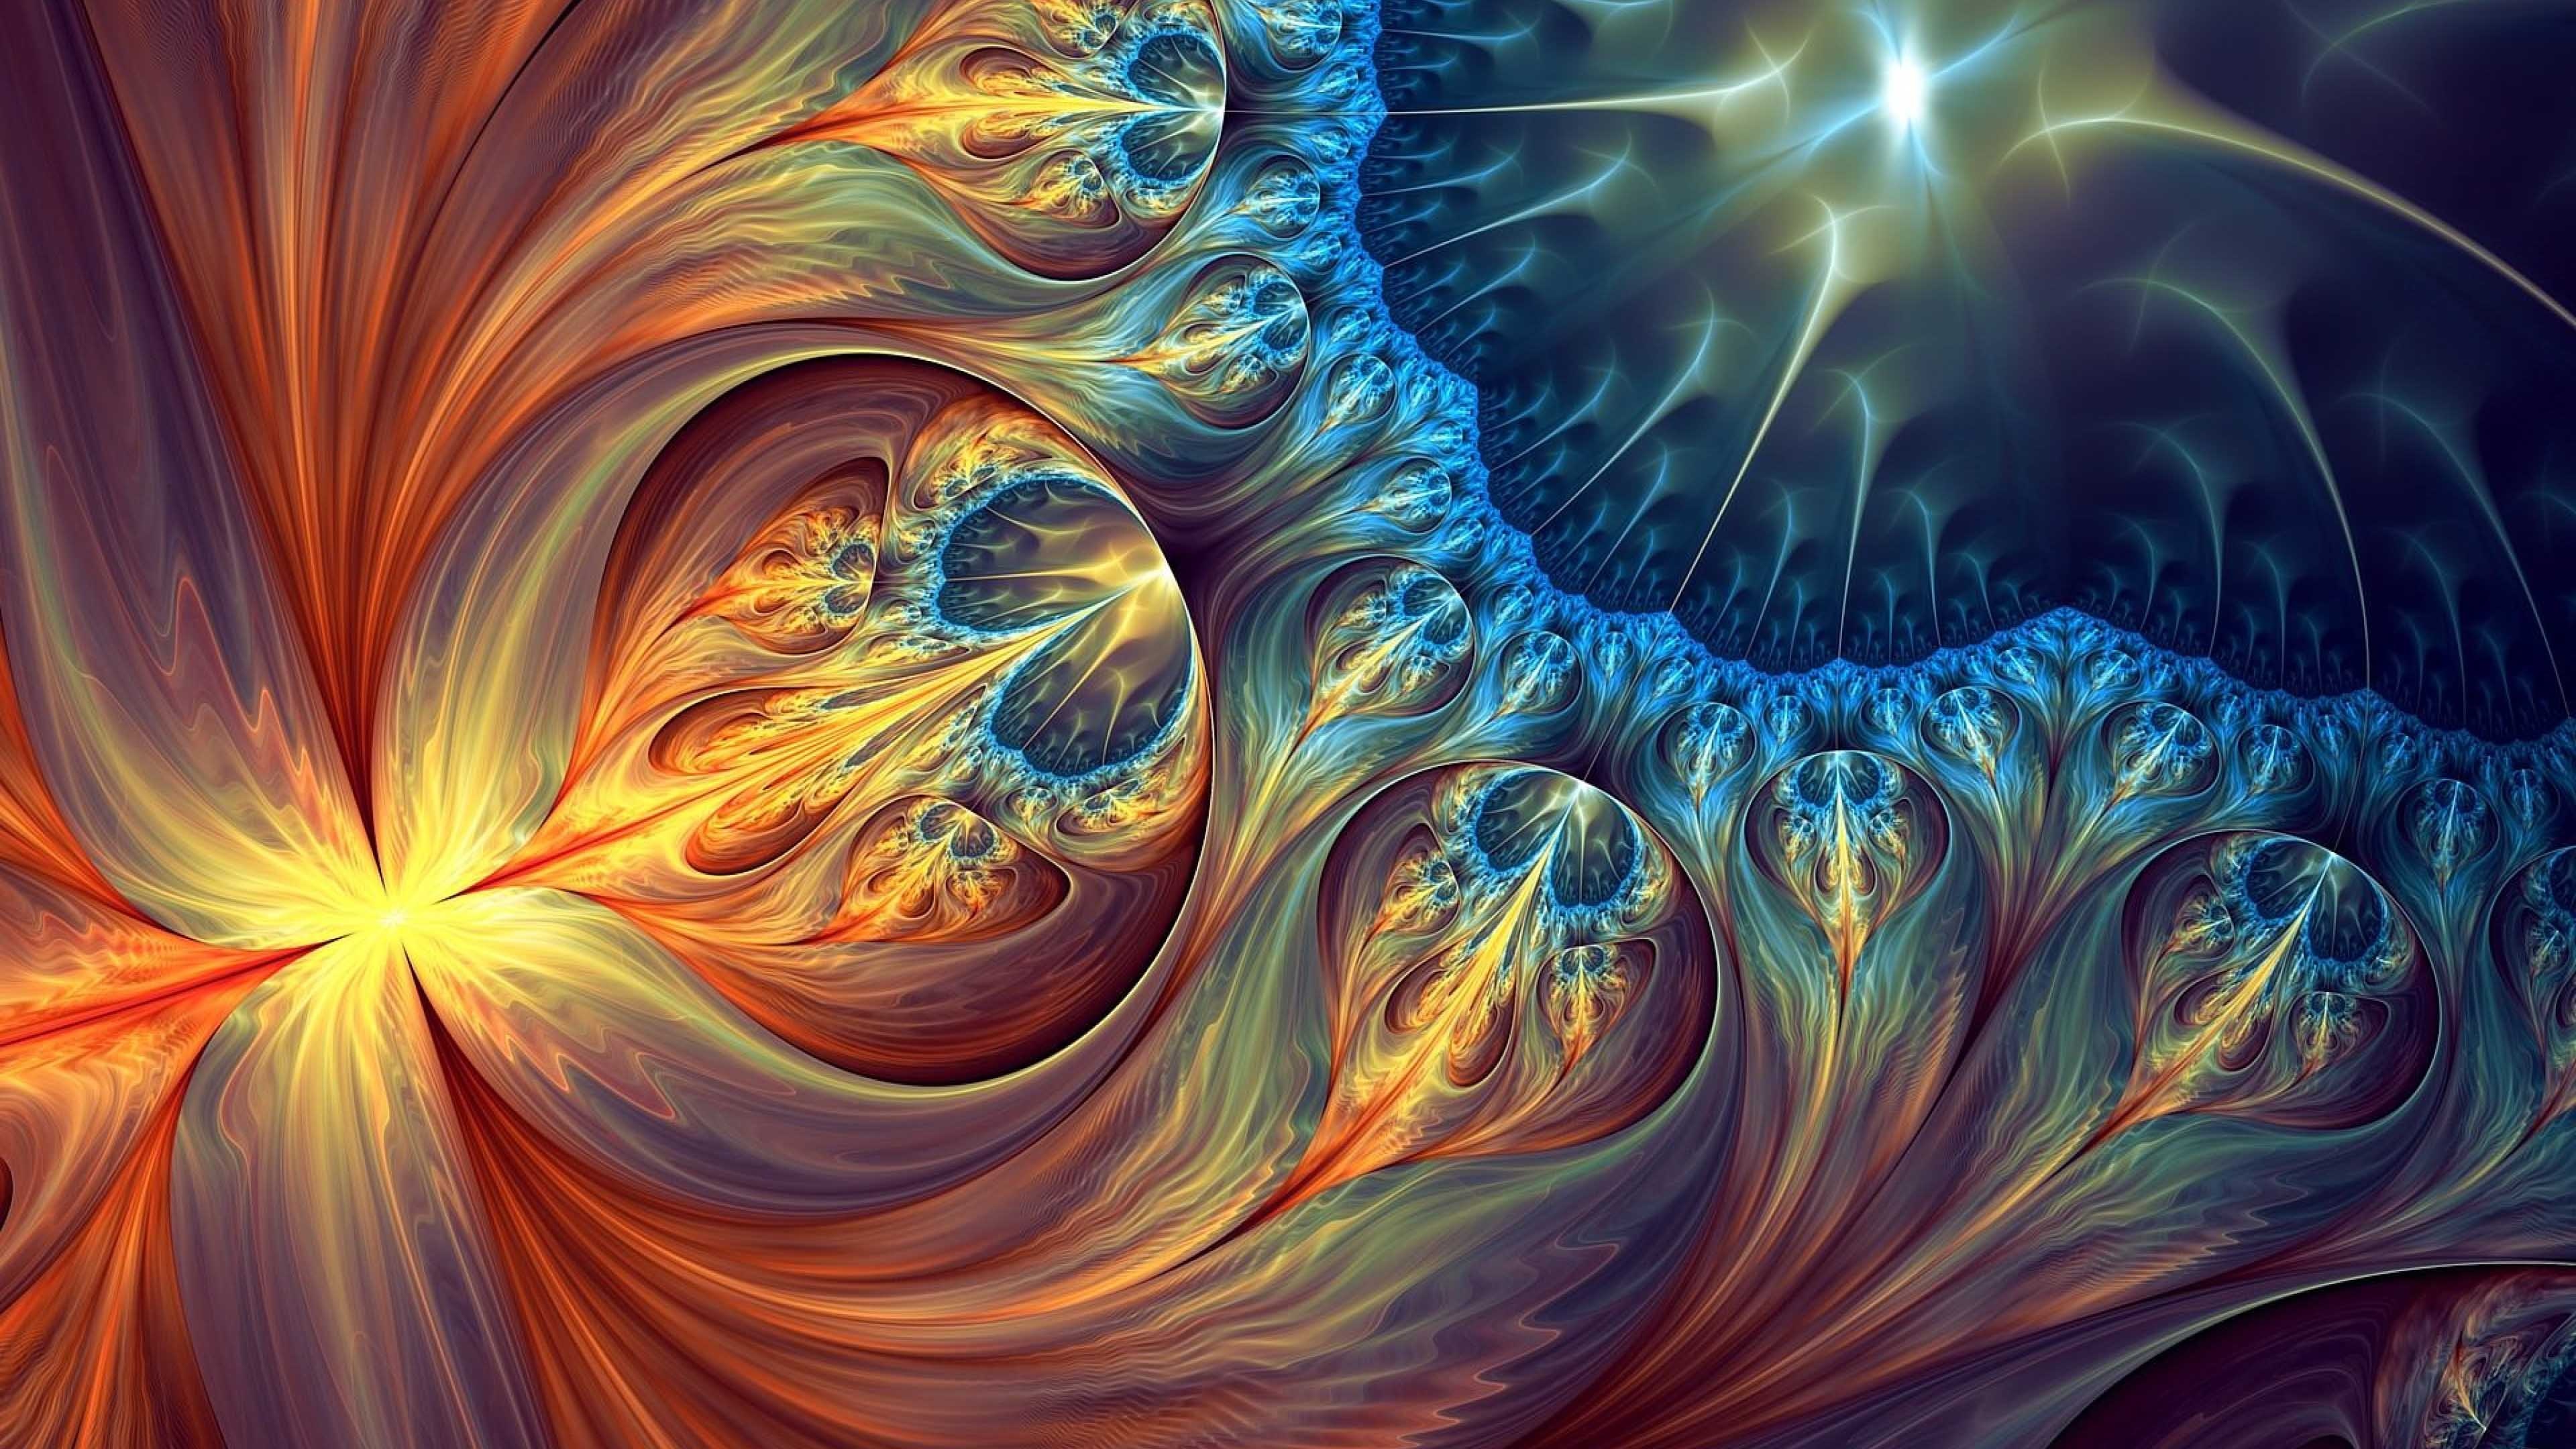 Abstraction shapes, Colorful fractal, 3D high resolution, Abstract art, 3840x2160 4K Desktop